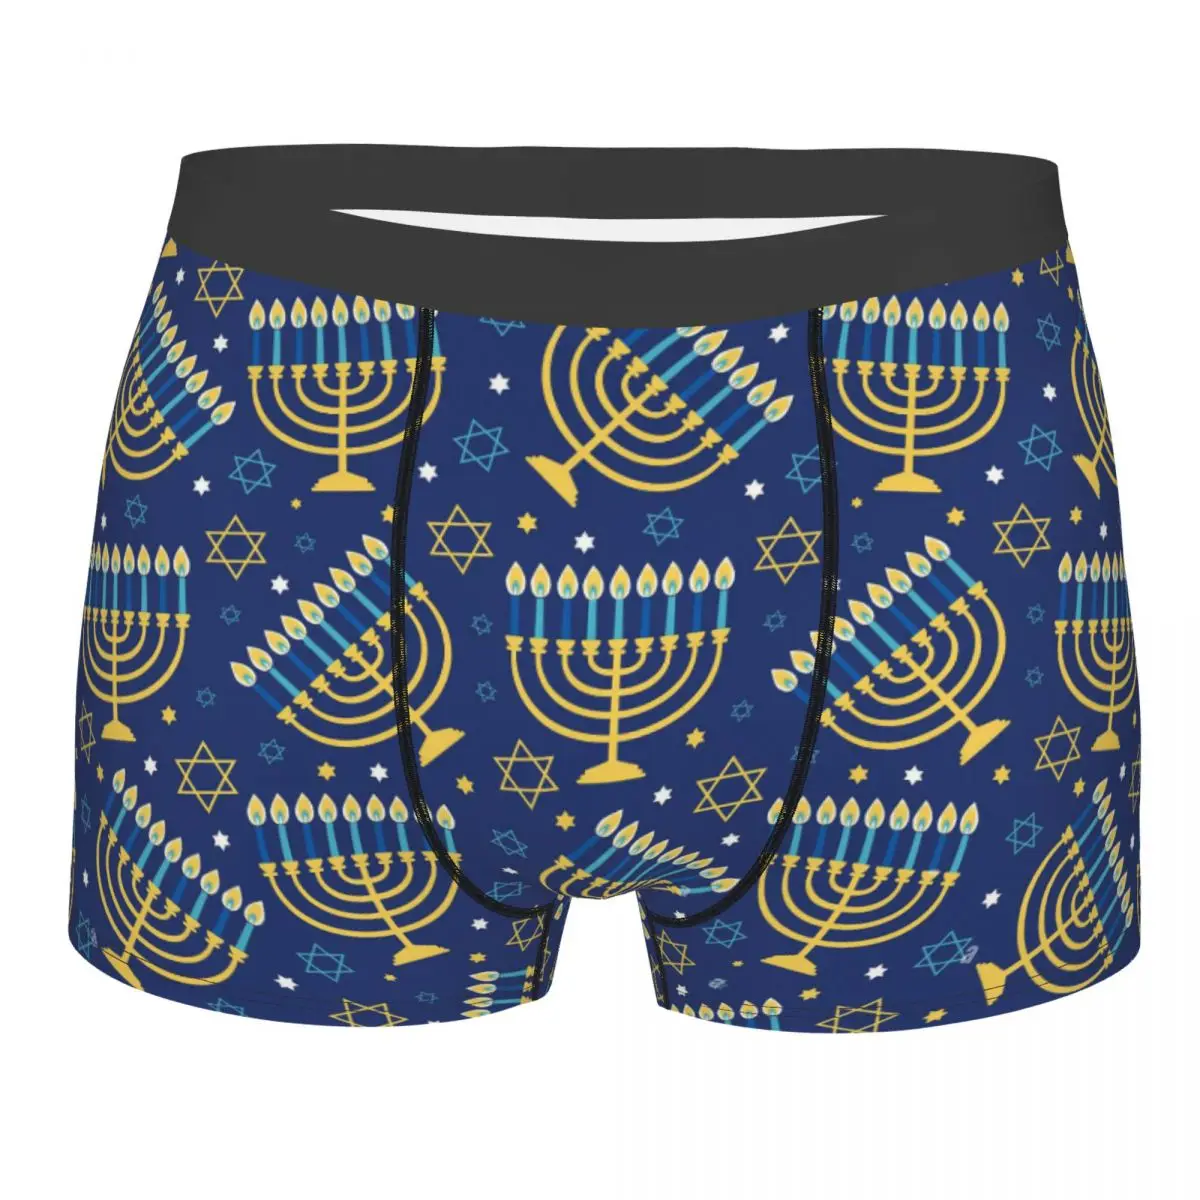 Hanukkah Pattern Man's Underpants, Highly Breathable printing High Quality Birthday Gifts